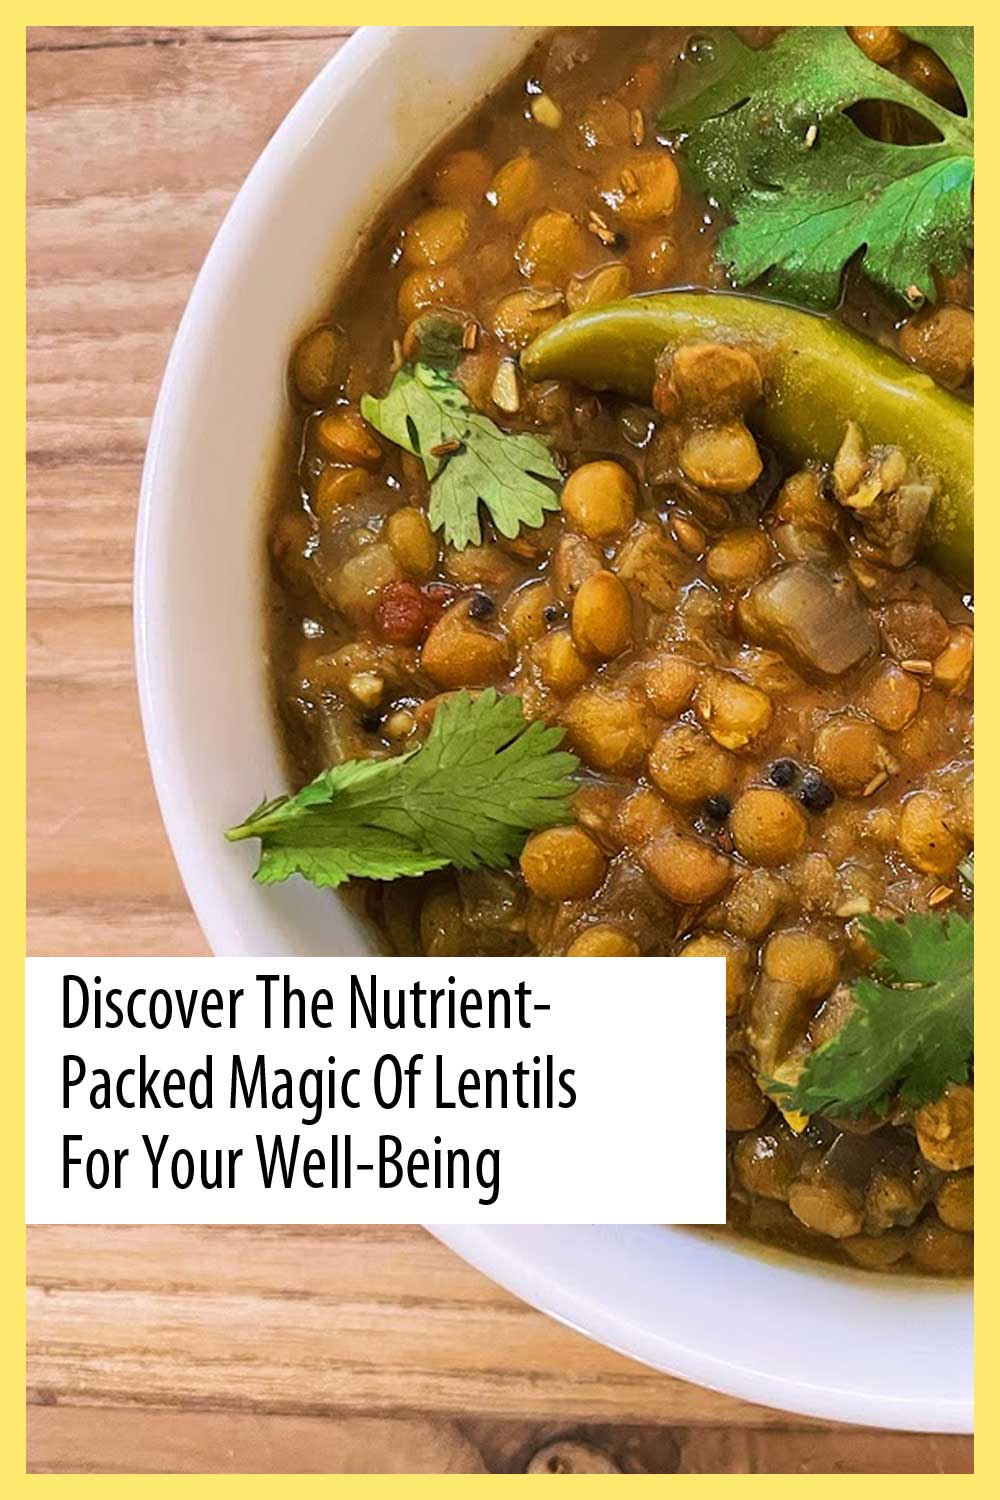 Discover the Nutrient-Packed Magic of Lentils for Your Well-being